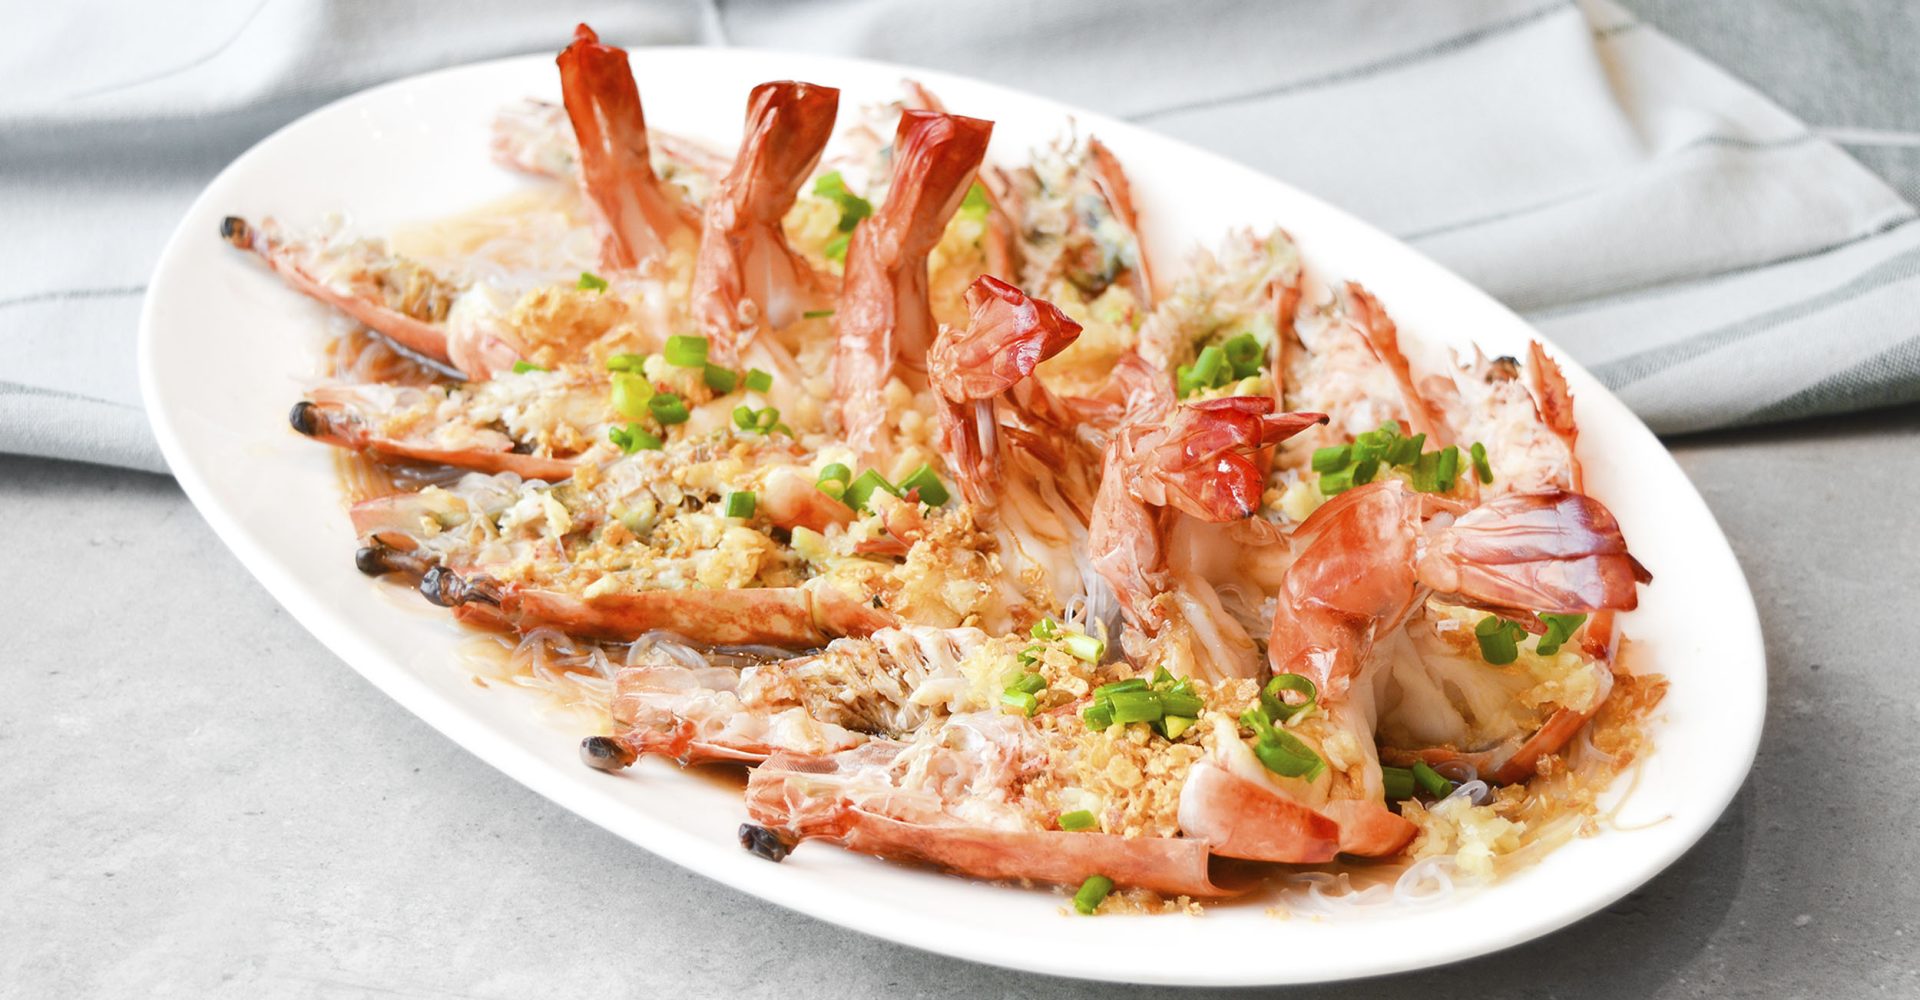 Steamed tiger prawns with garlic and vermicelli